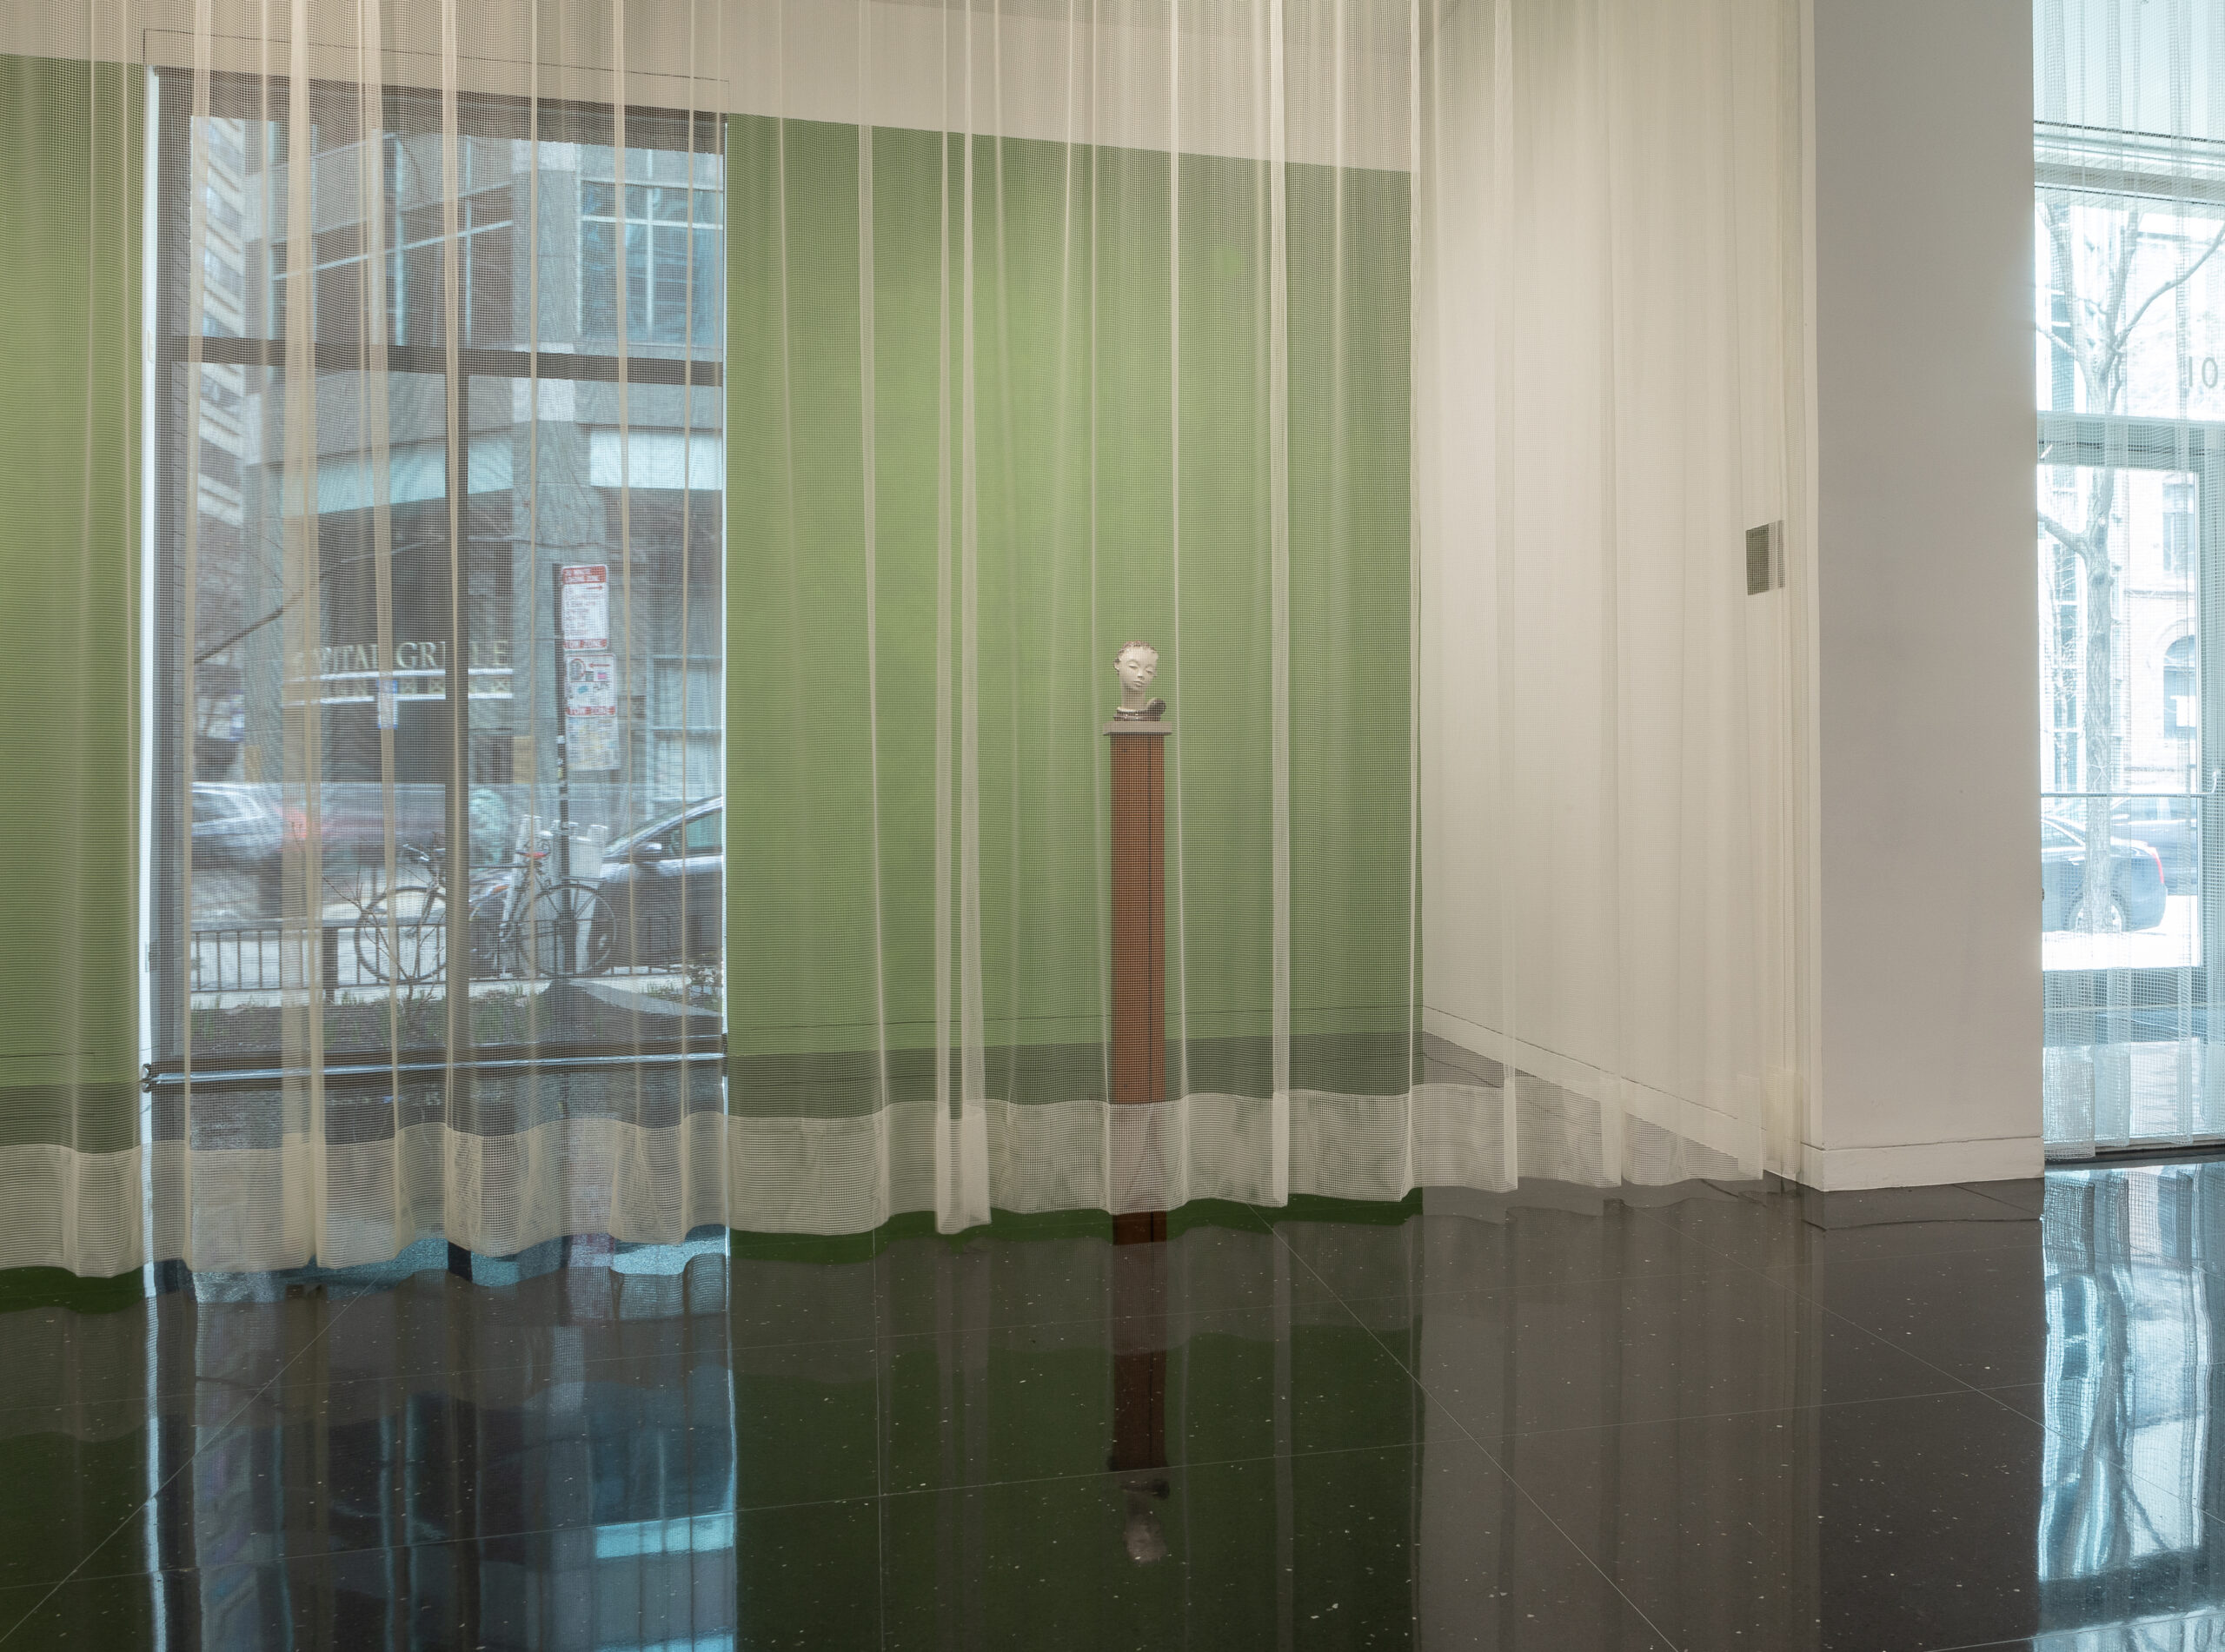 A sculpture of a head sits on a brown pedestal in front of a gallery wall painted pea green. In front of the statue is a transparent white mesh curtain that spans the length of the gallery.